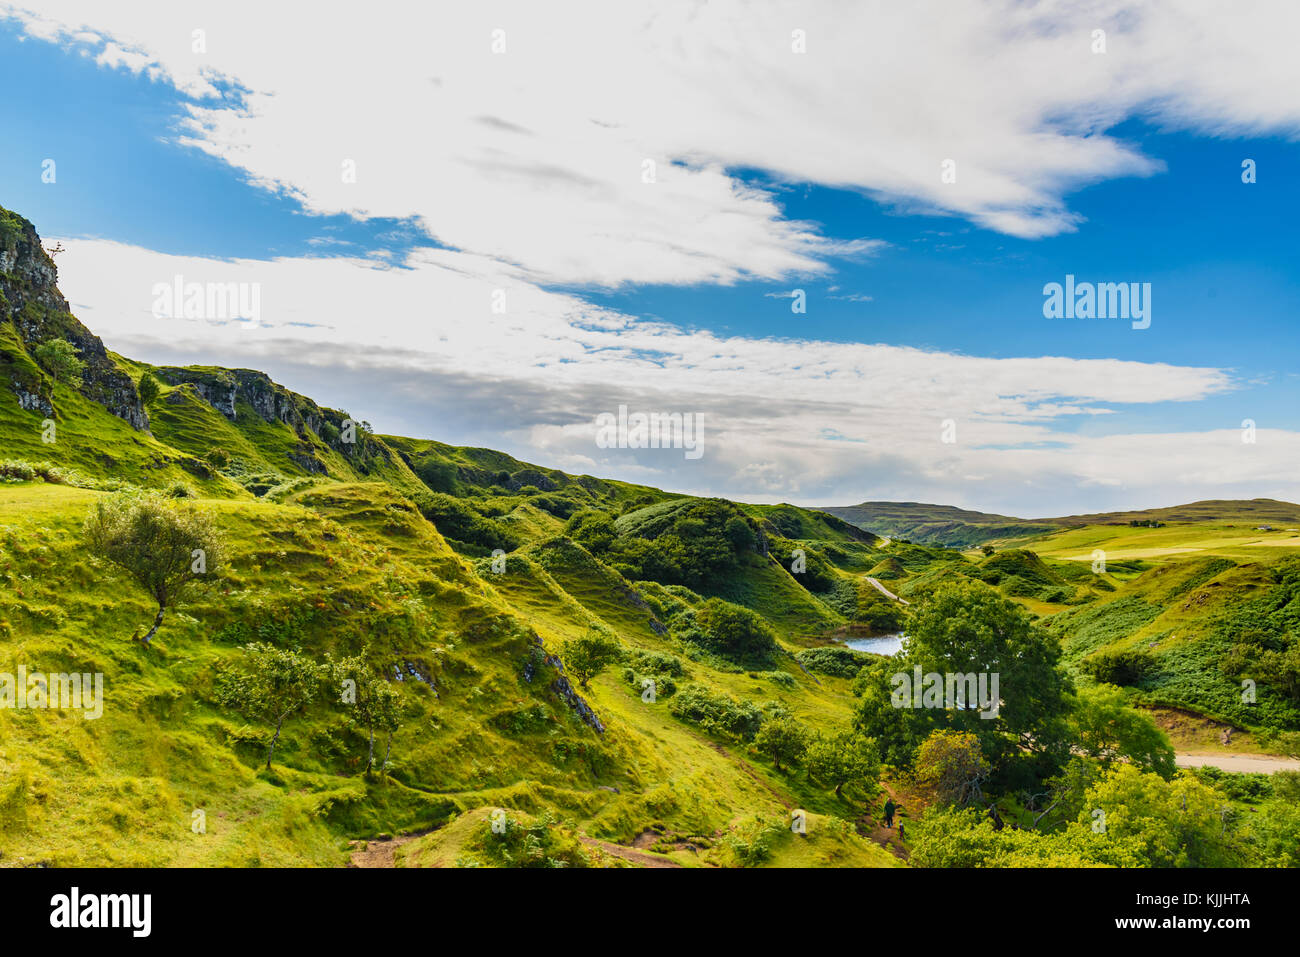 The very green nature of the Mystic Fairy Glen in the Isle of SKye, Scotland Stock Photo